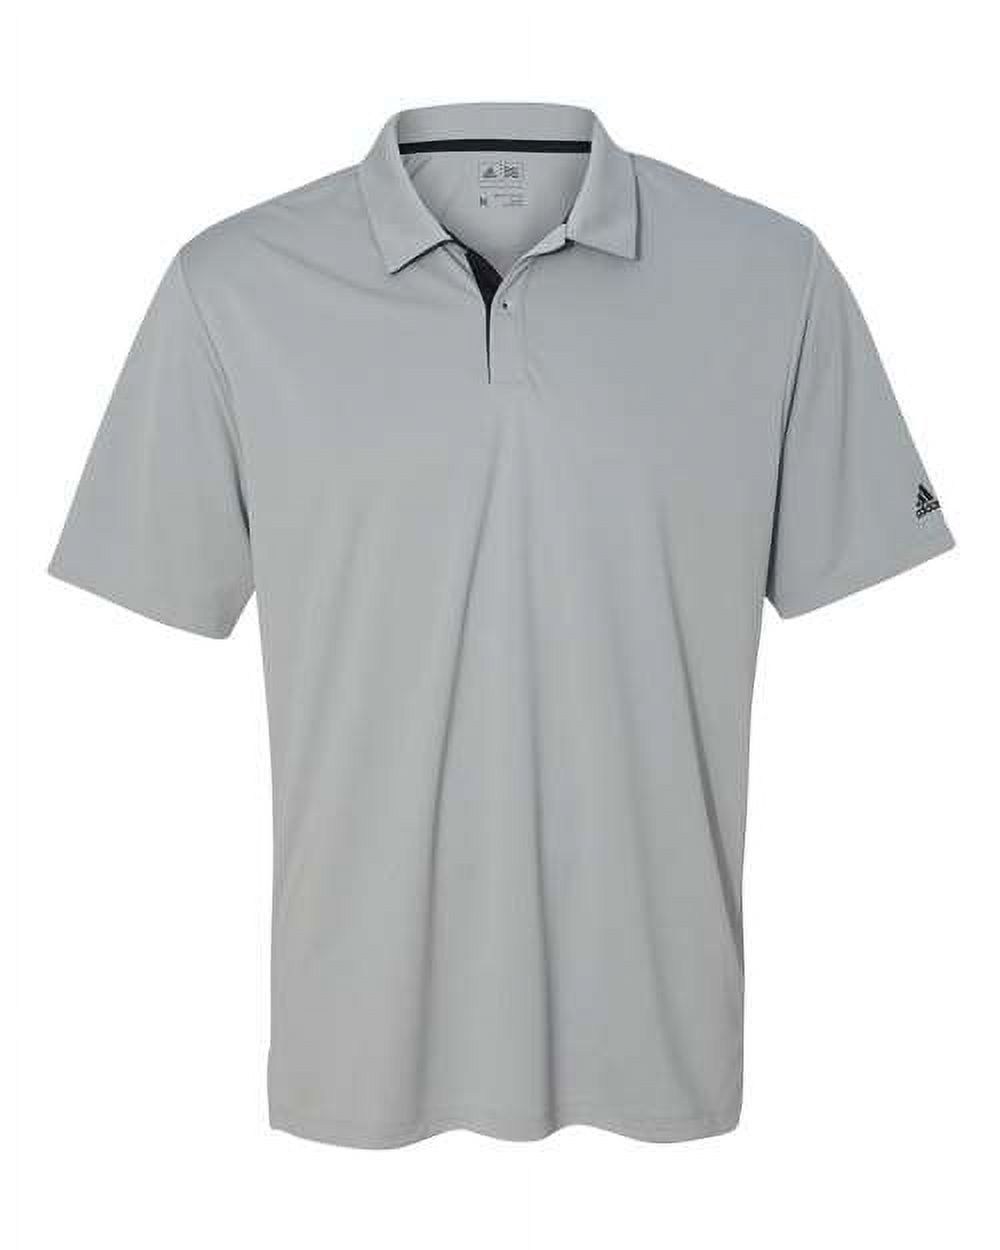 adidas Golf Men's climalite Texture Solid Polo - image 1 of 3